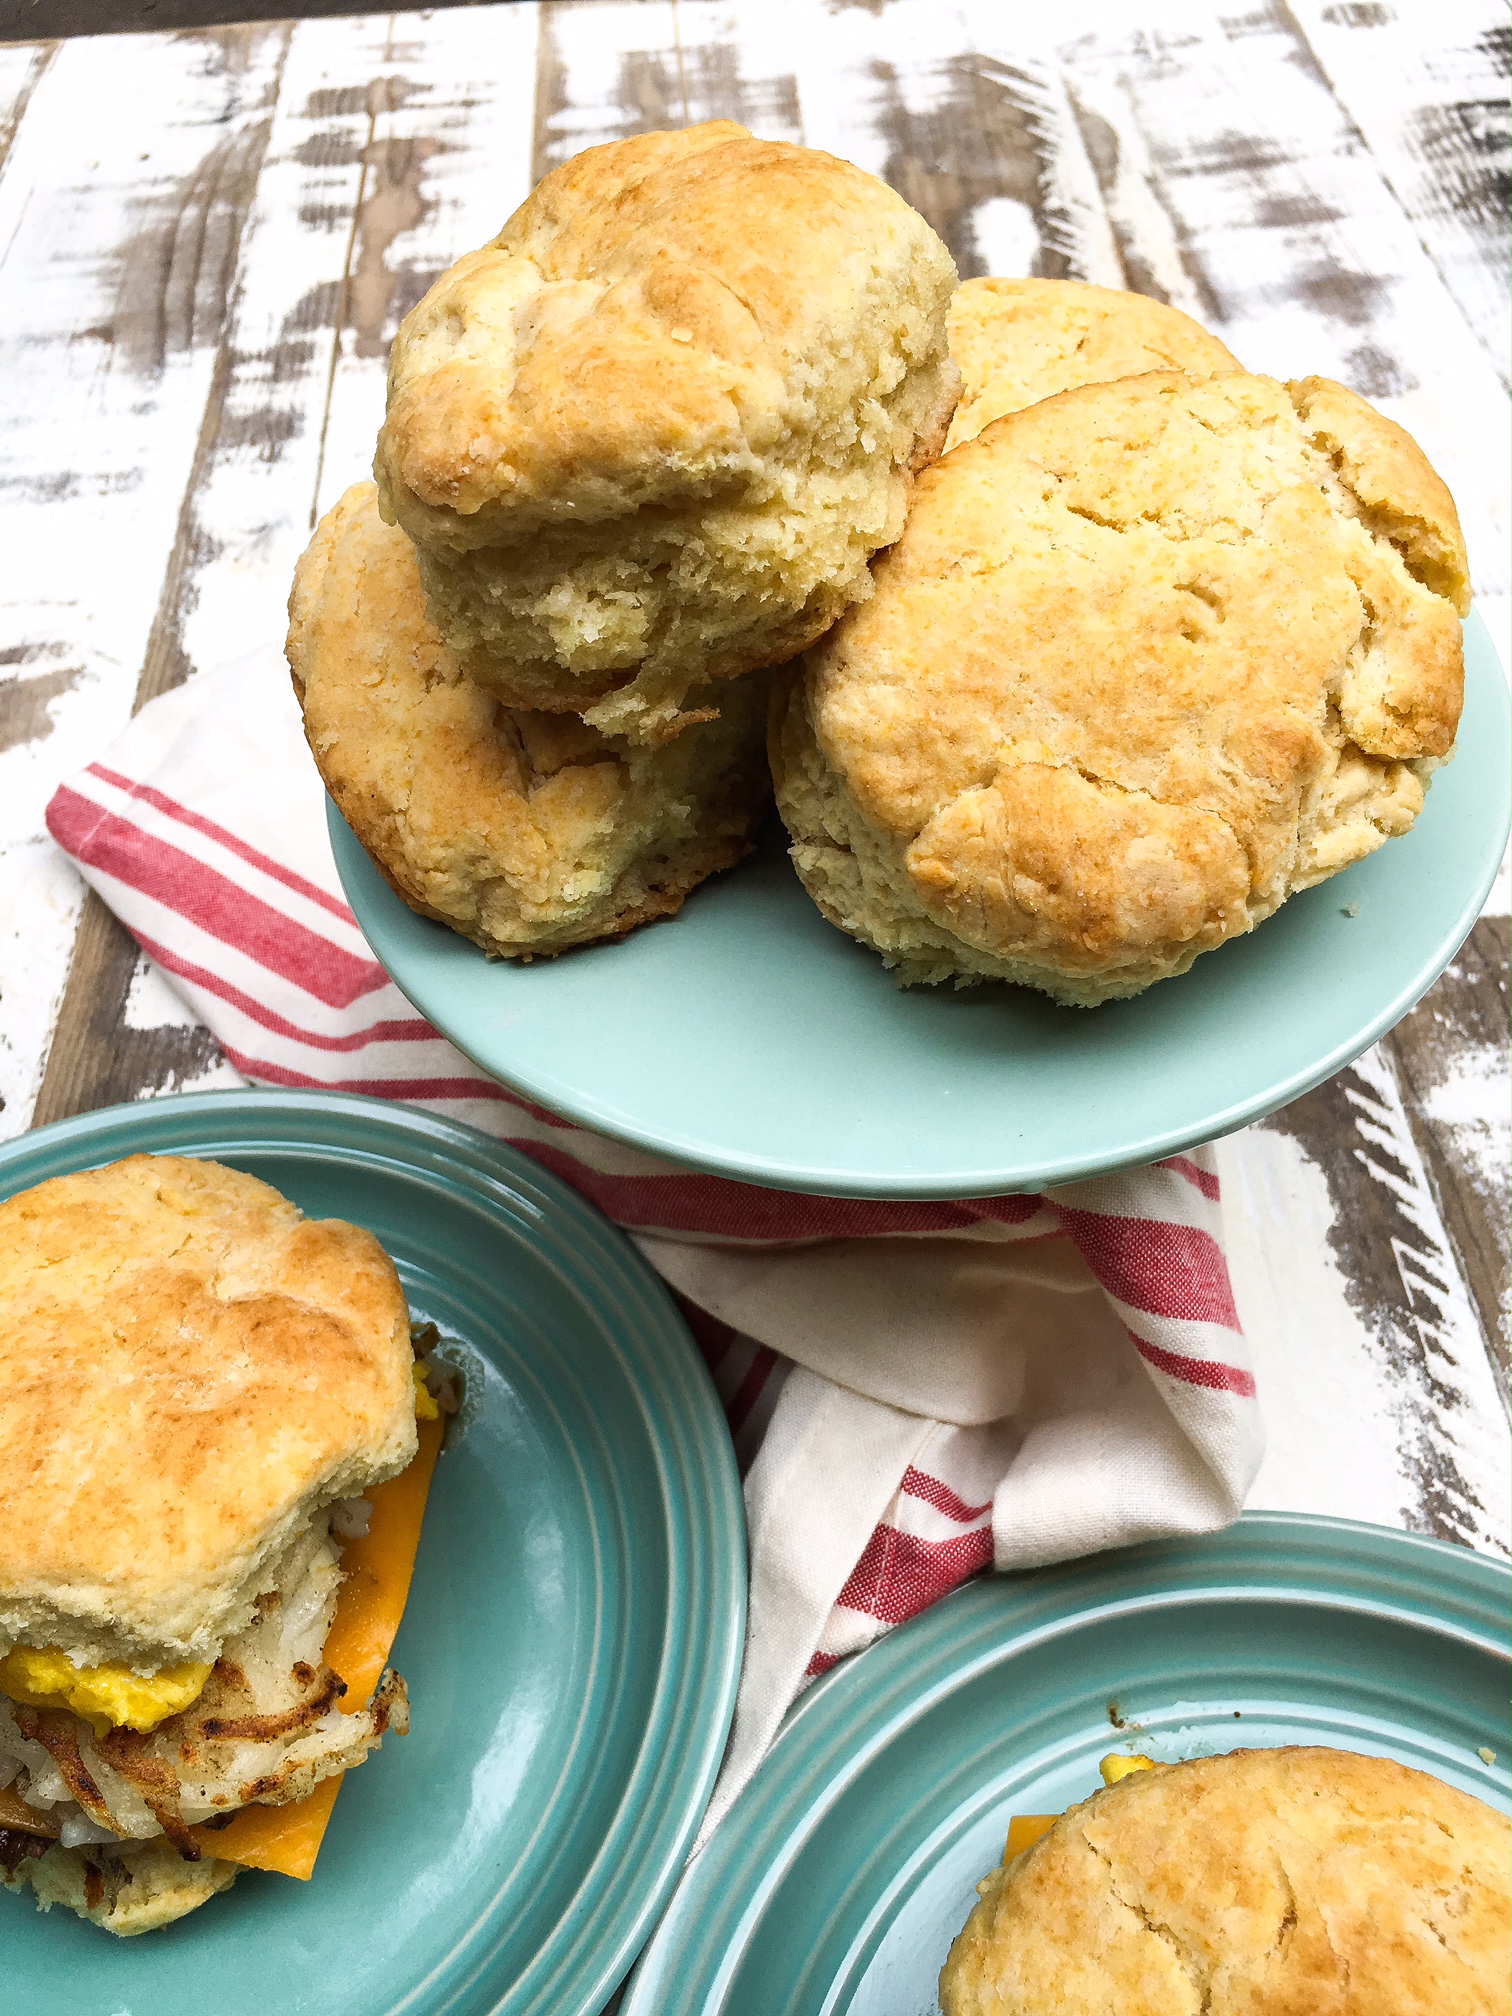 steak egg and cheese biscuits